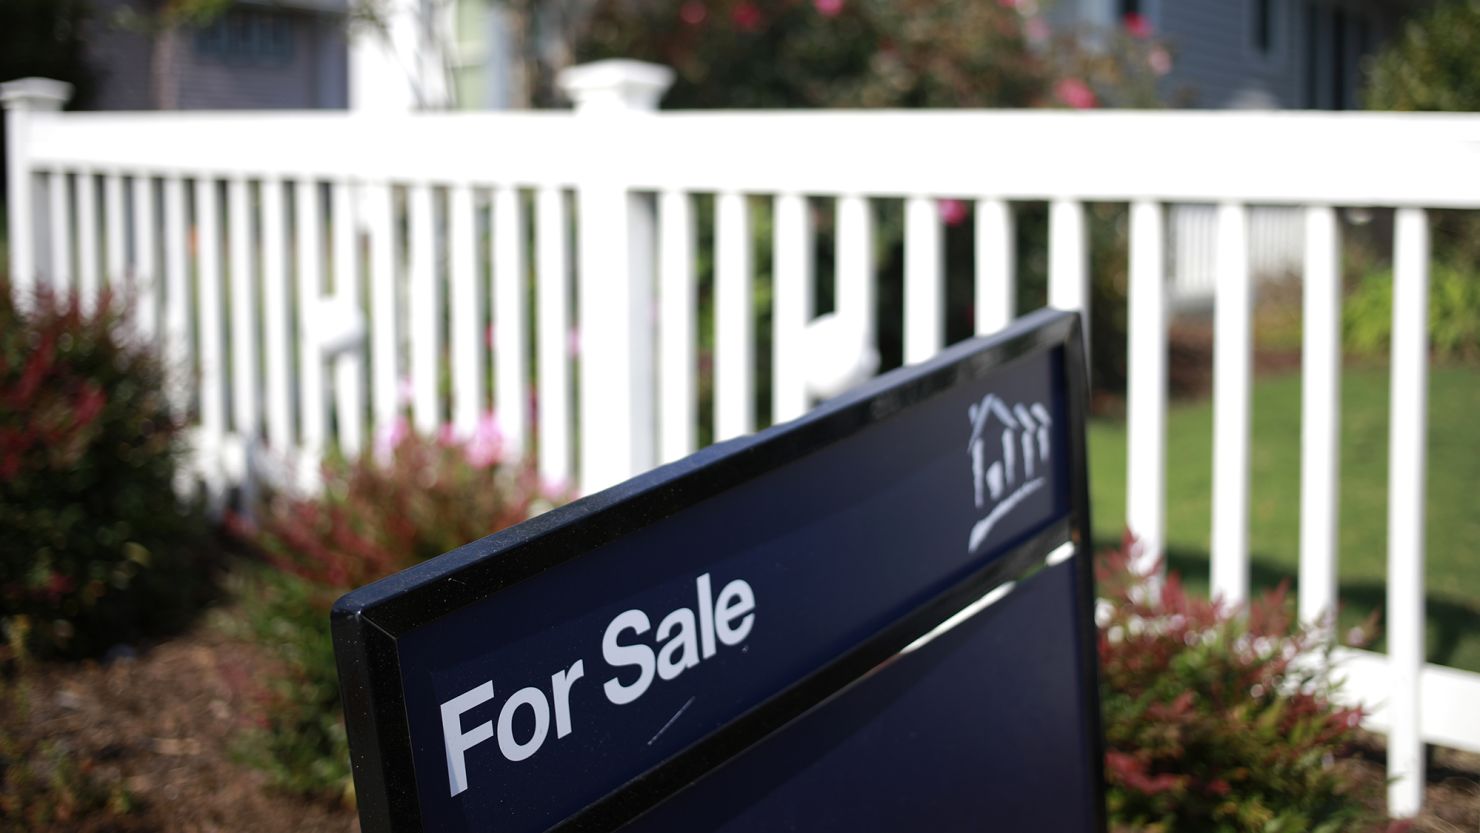 A "For Sale" sign outside a home in Nashville, Tennessee, on Sunday, Oct. 24, 2021.